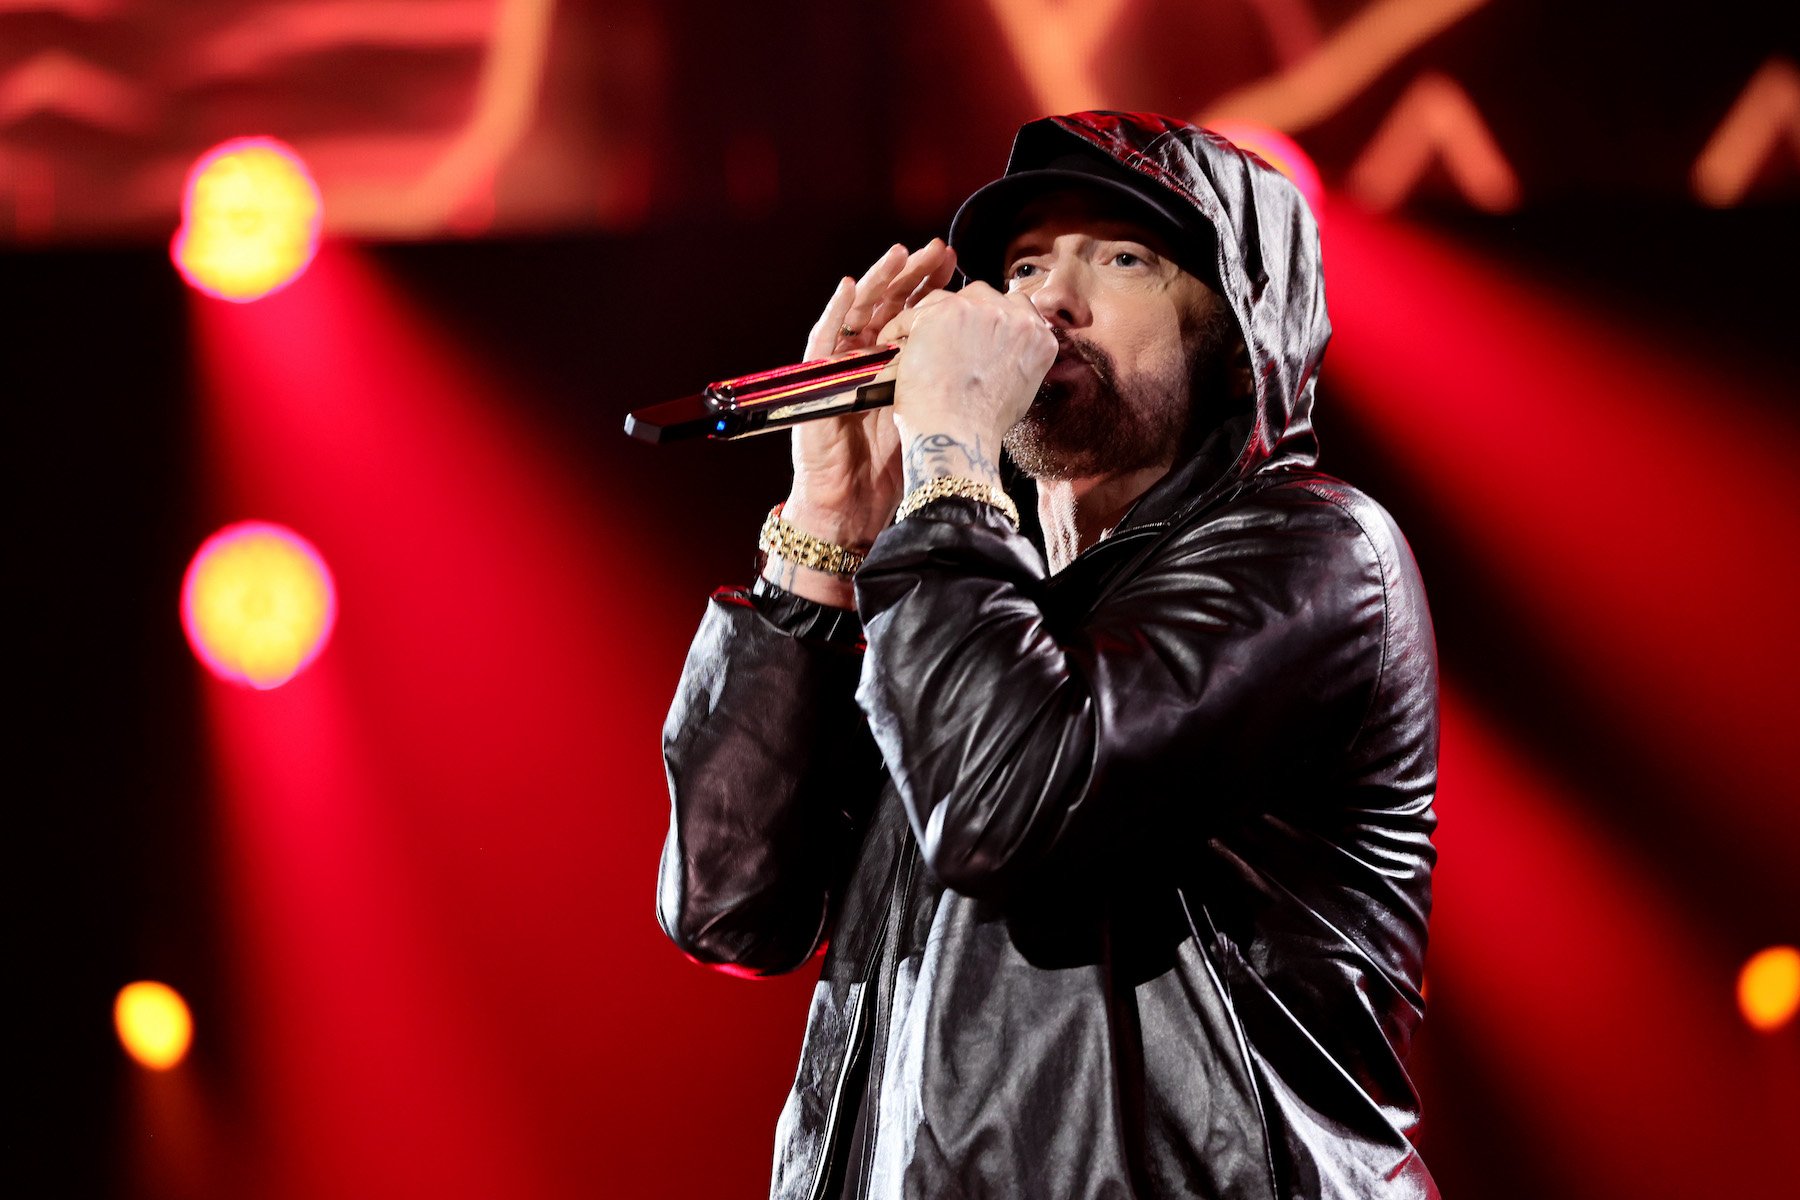 Eminem, whose brother has a music career of his own, rapping onstage